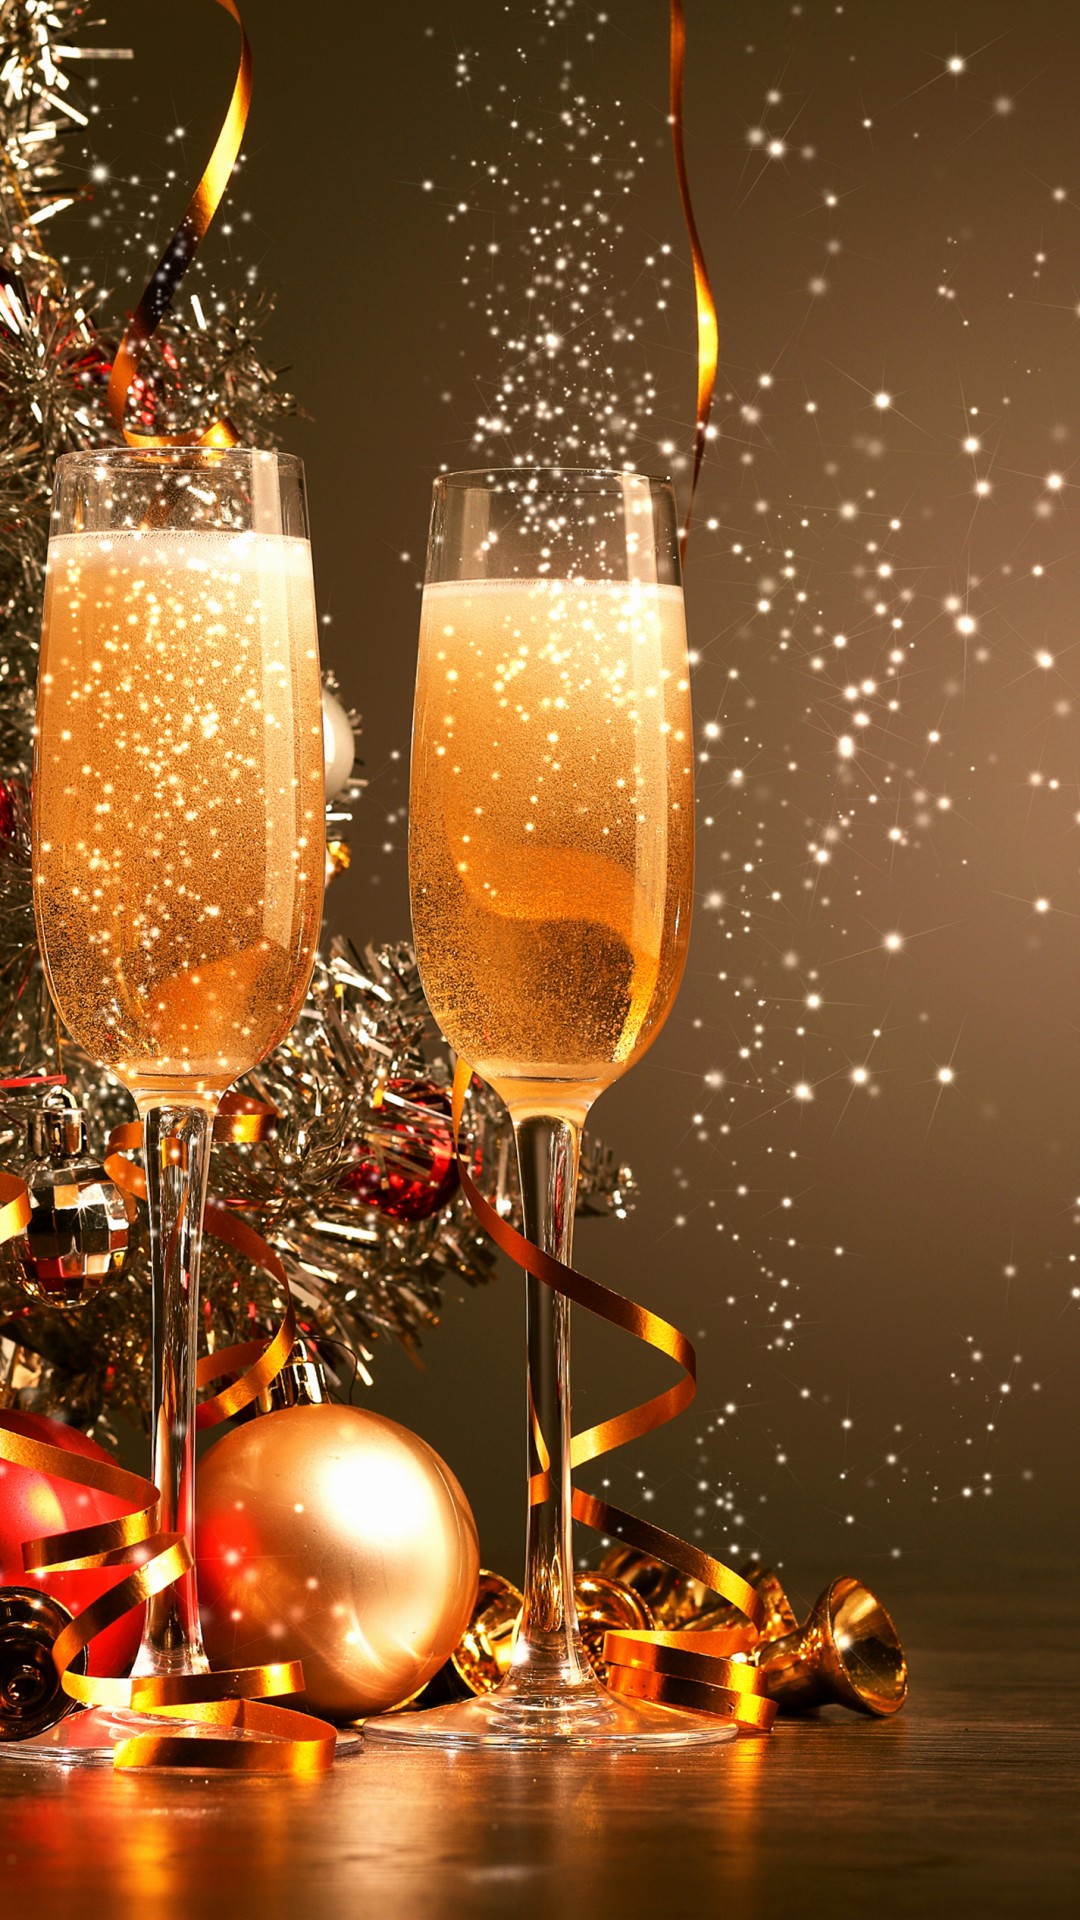 Wallpaper Christmas, New Year, champagne, balls, decorations, 4k